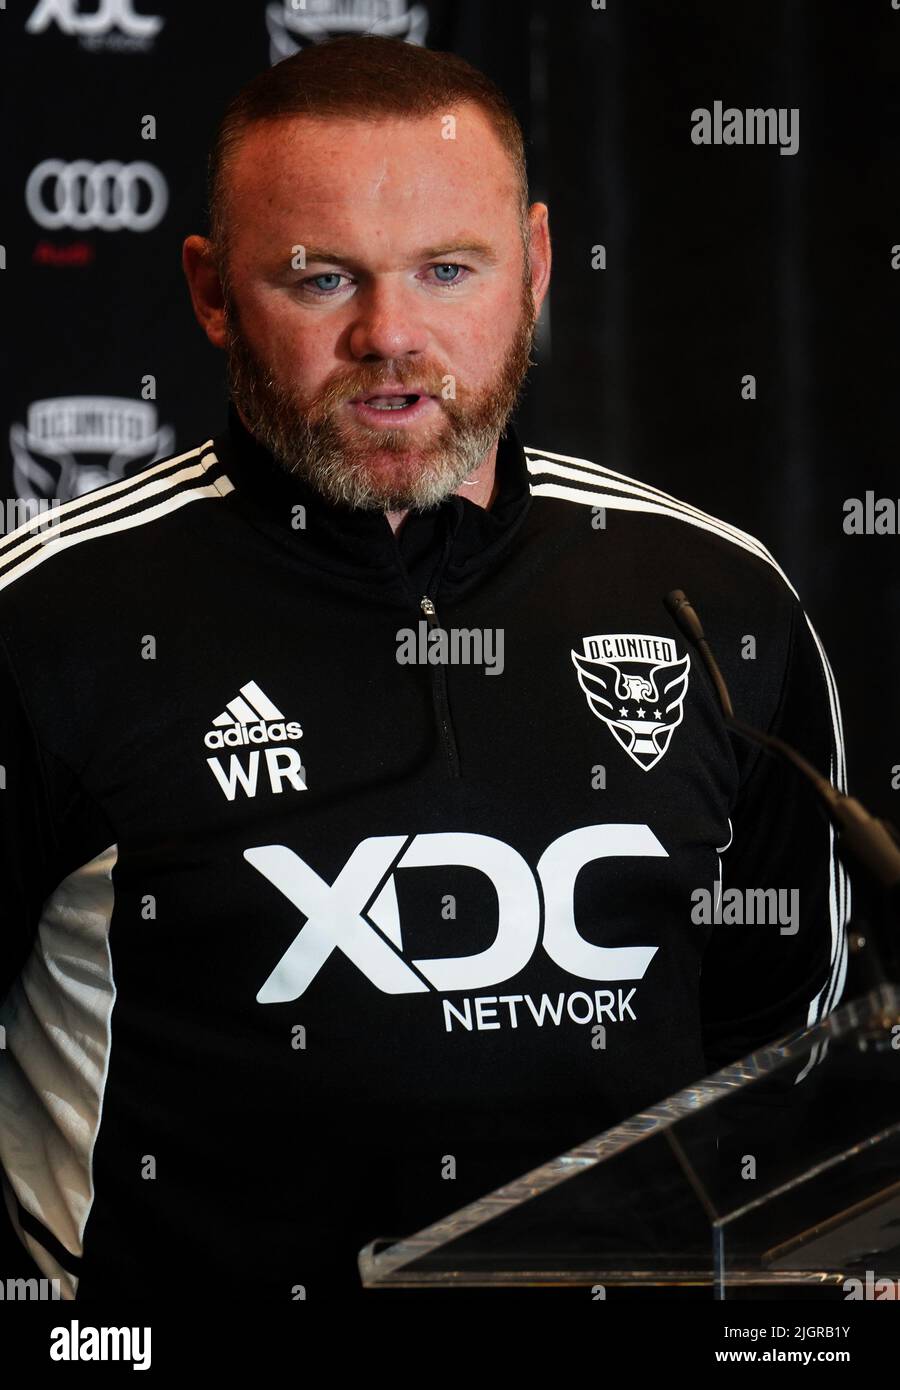 WASHINGTON, DC, USA - 12 JULY 2022: Wayne Rooney during a press conference on July 12, 2022, at Audi Field, in Washington, DC. (Photo by Tony Quinn-Alamy Live News) Stock Photo